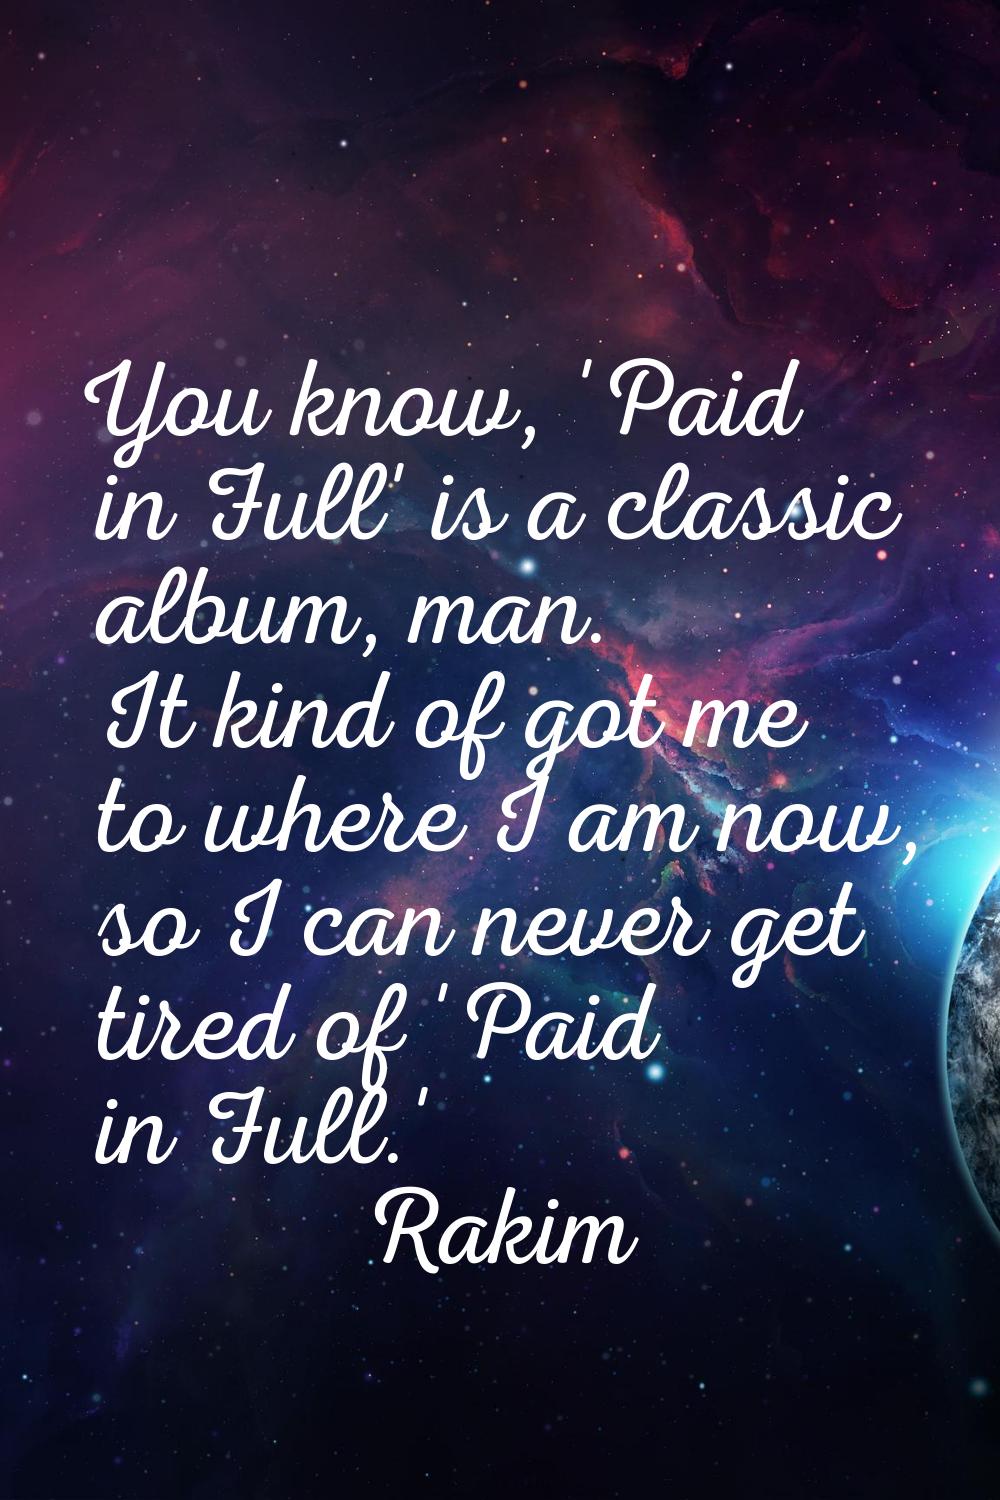 You know, 'Paid in Full' is a classic album, man. It kind of got me to where I am now, so I can nev